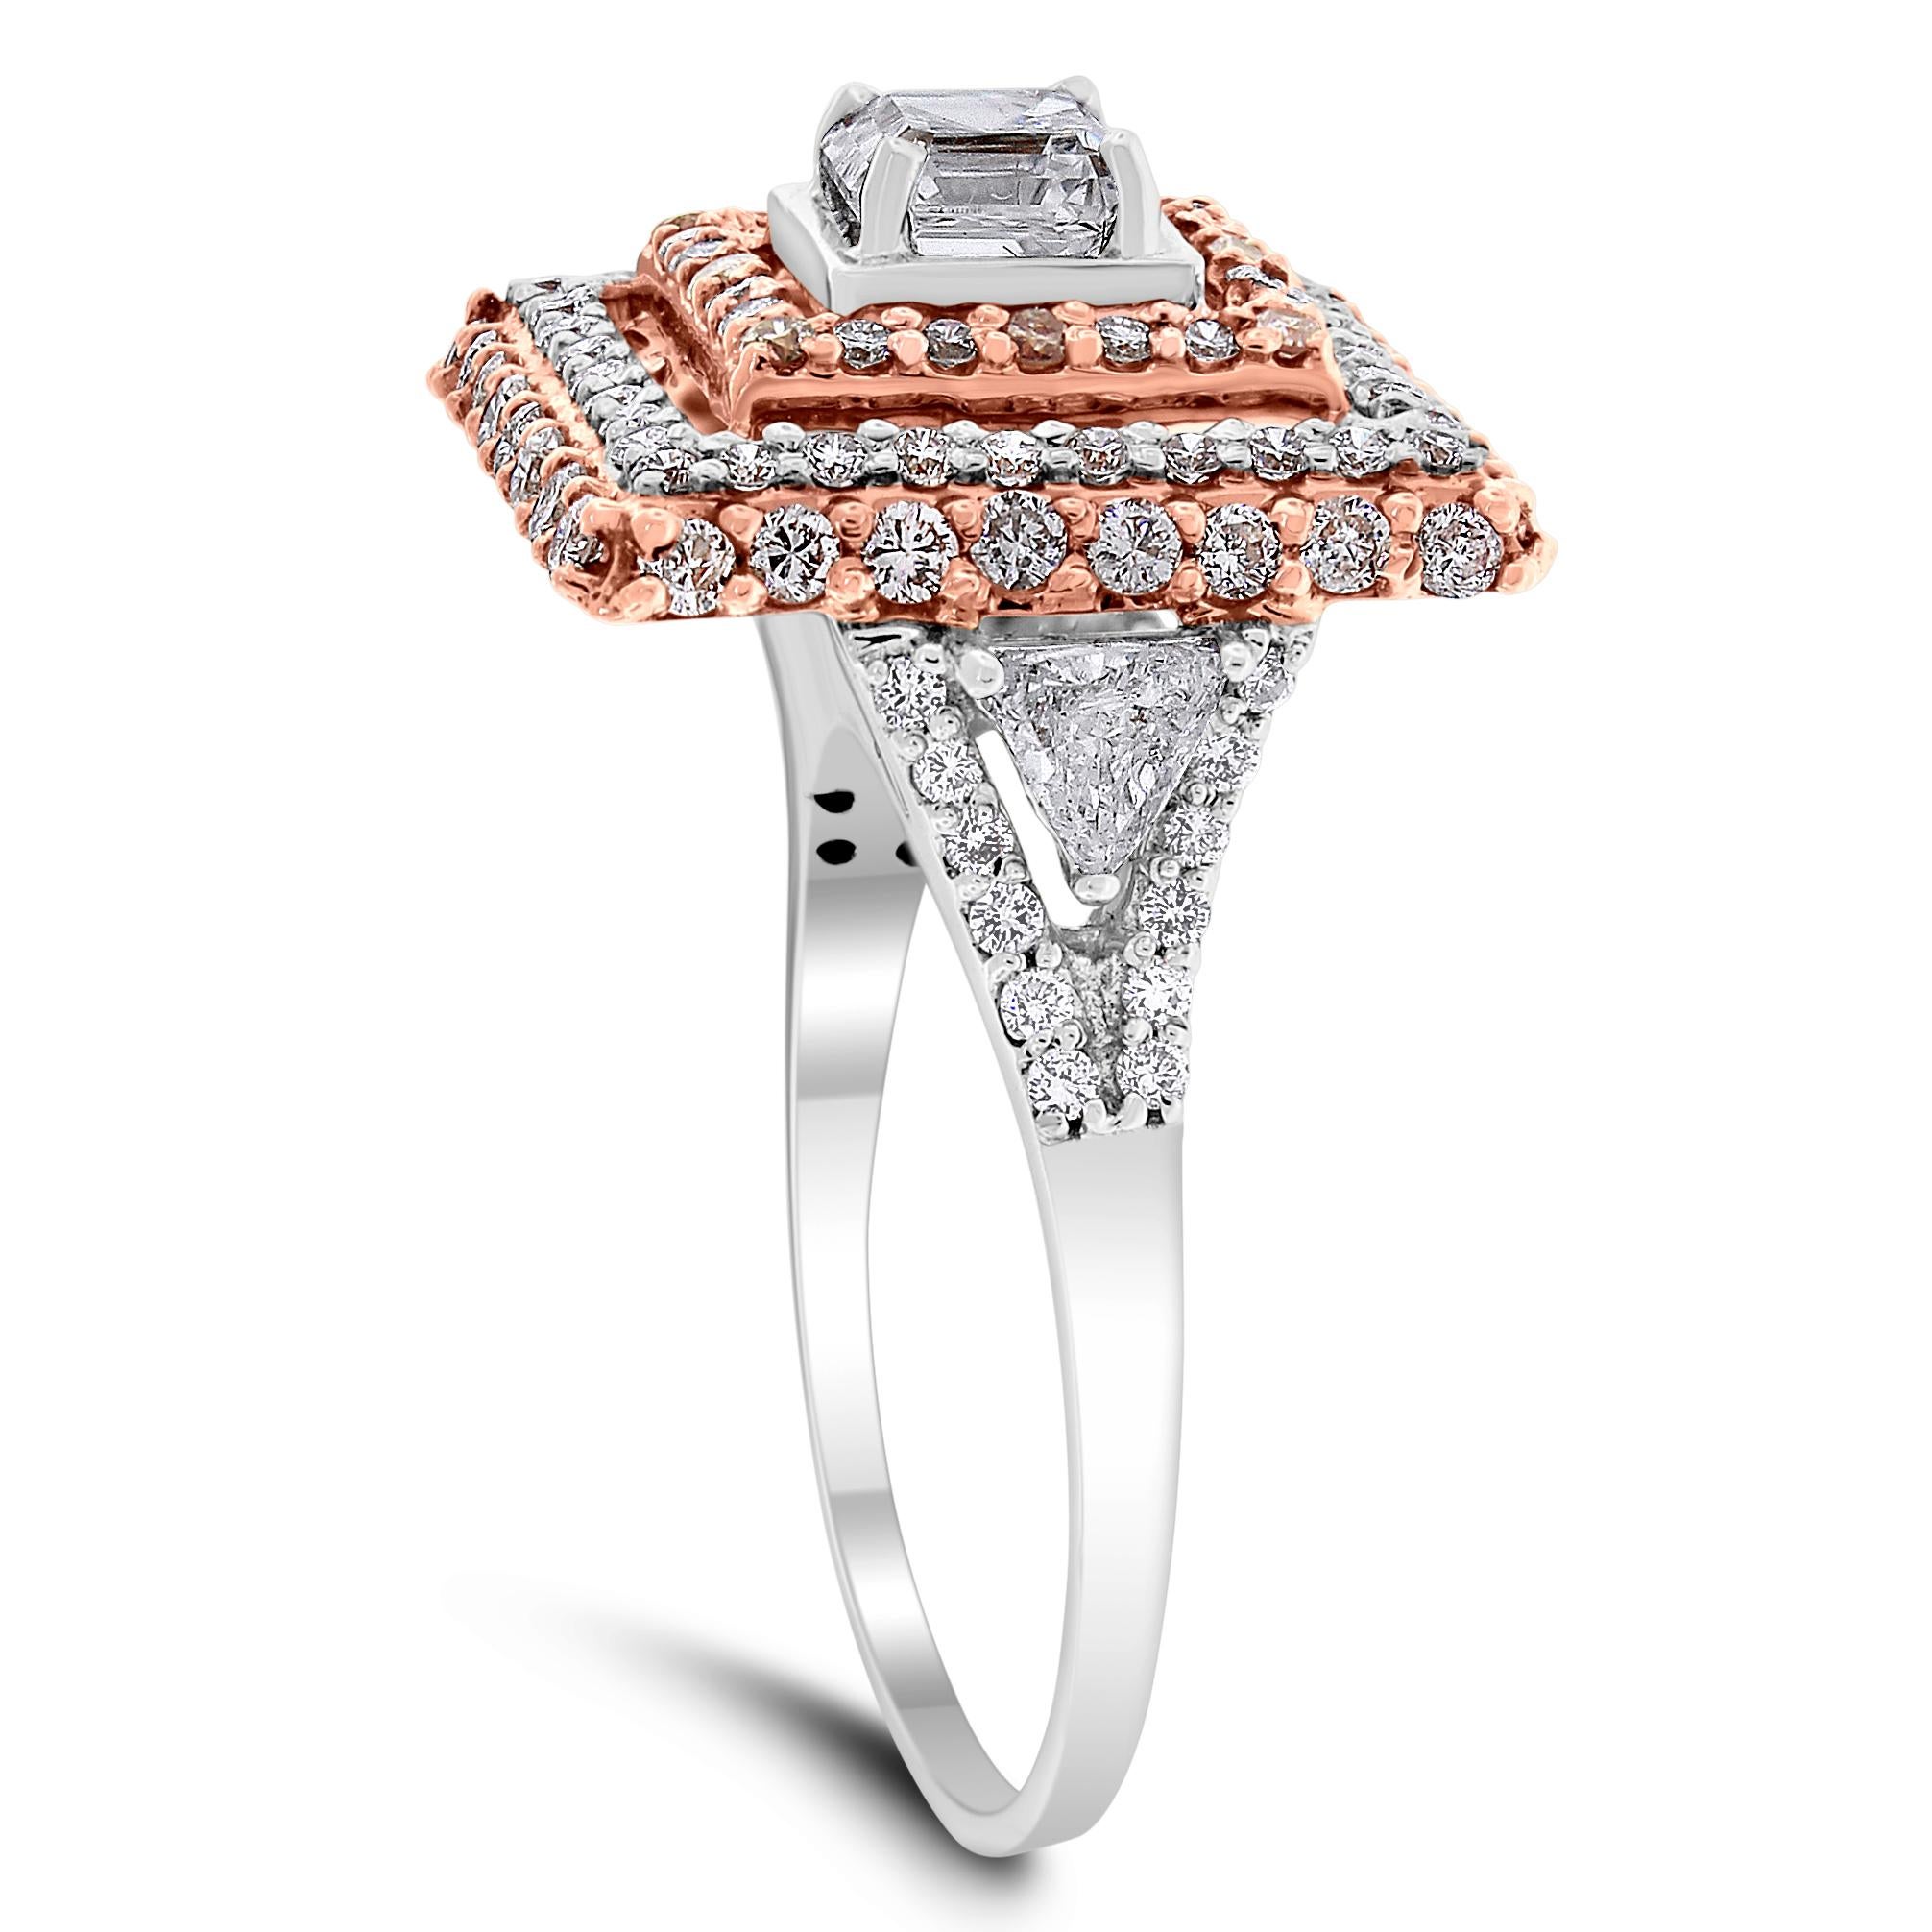 The Trina is a refreshing cocktail diamond ring bringing together shapes and colors in a stylish unique design.

Center Diamond Shape: Asscher Cut
Center Diamond Weight: 0.71 ct 
Diamond Color: G
Diamond Clarity: VVS

Side Diamonds Shapes: Trilliant